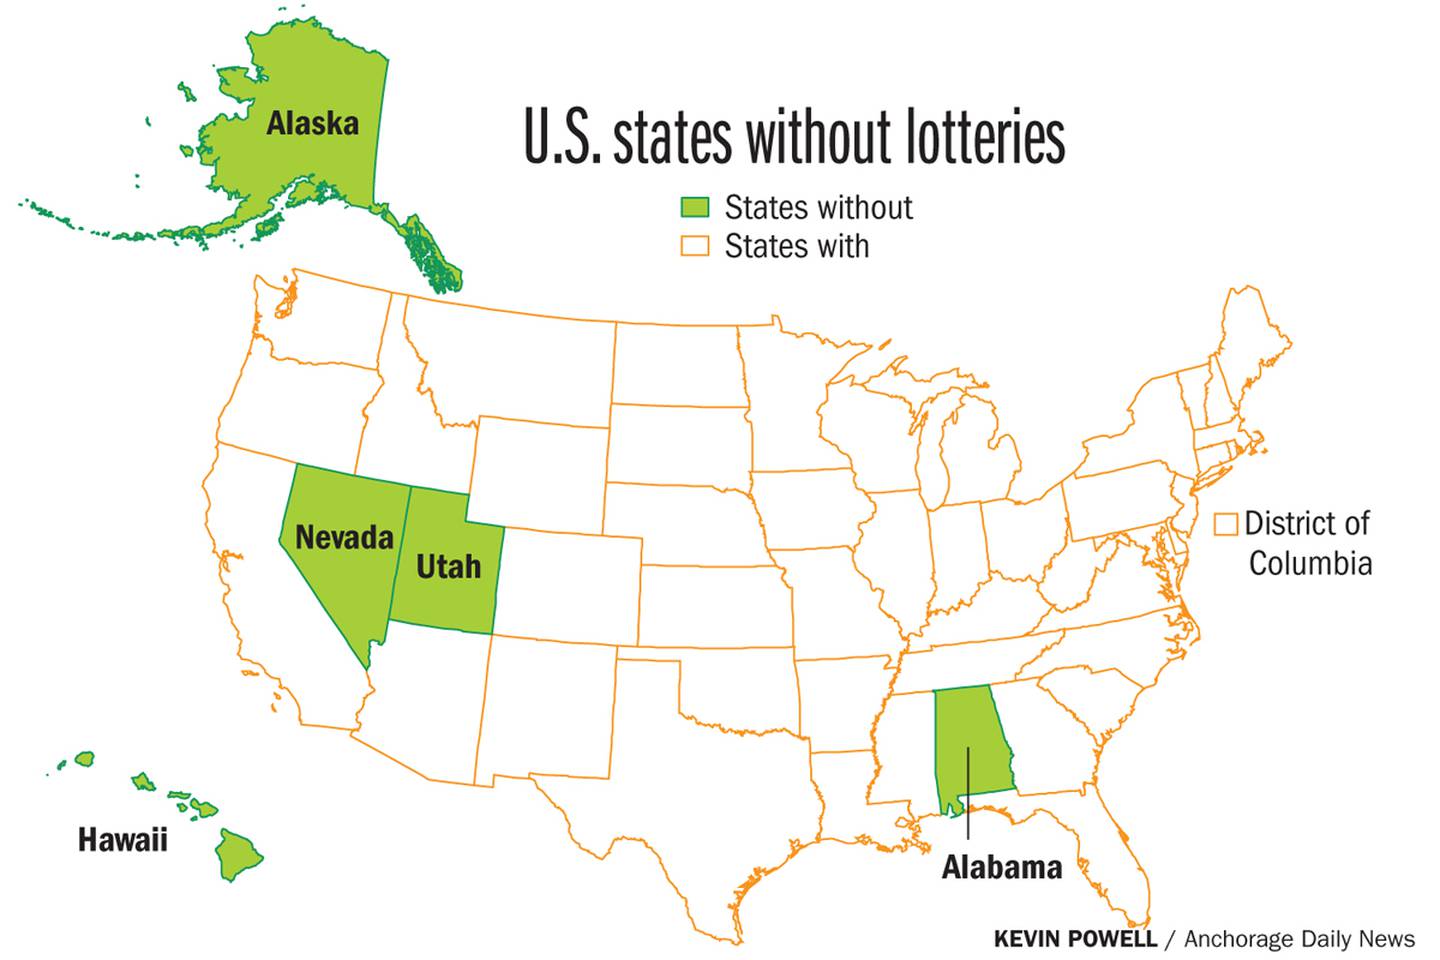 U.S. states without lotteries